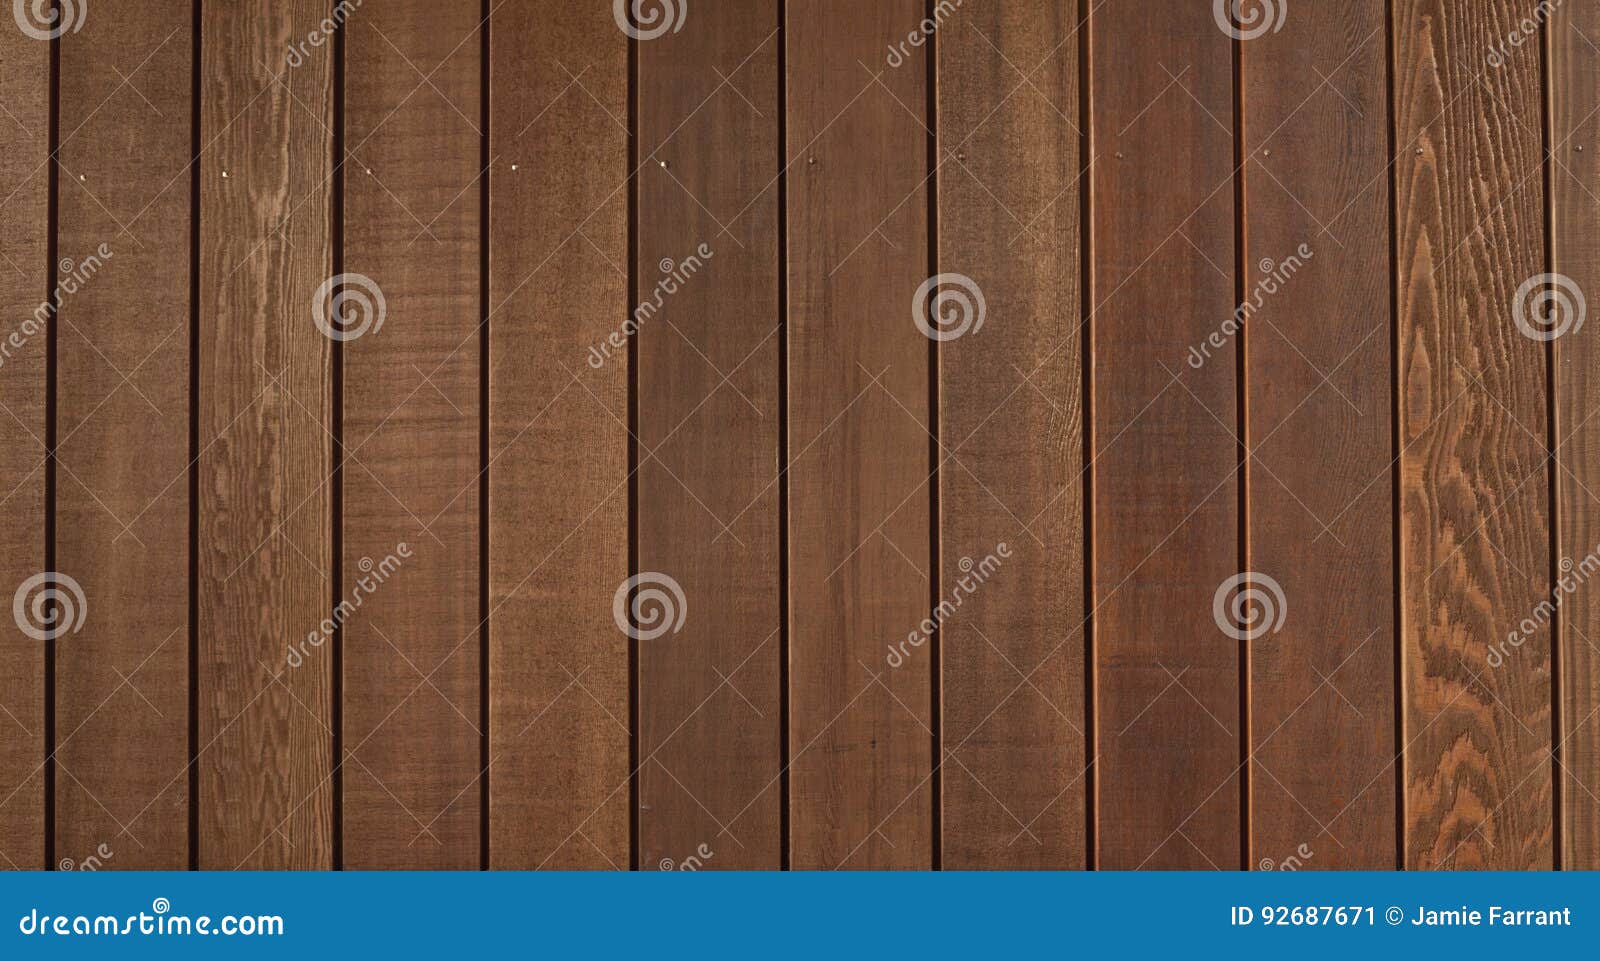 Cedar Wooden Wall Background Stock Image Image Of Wooden